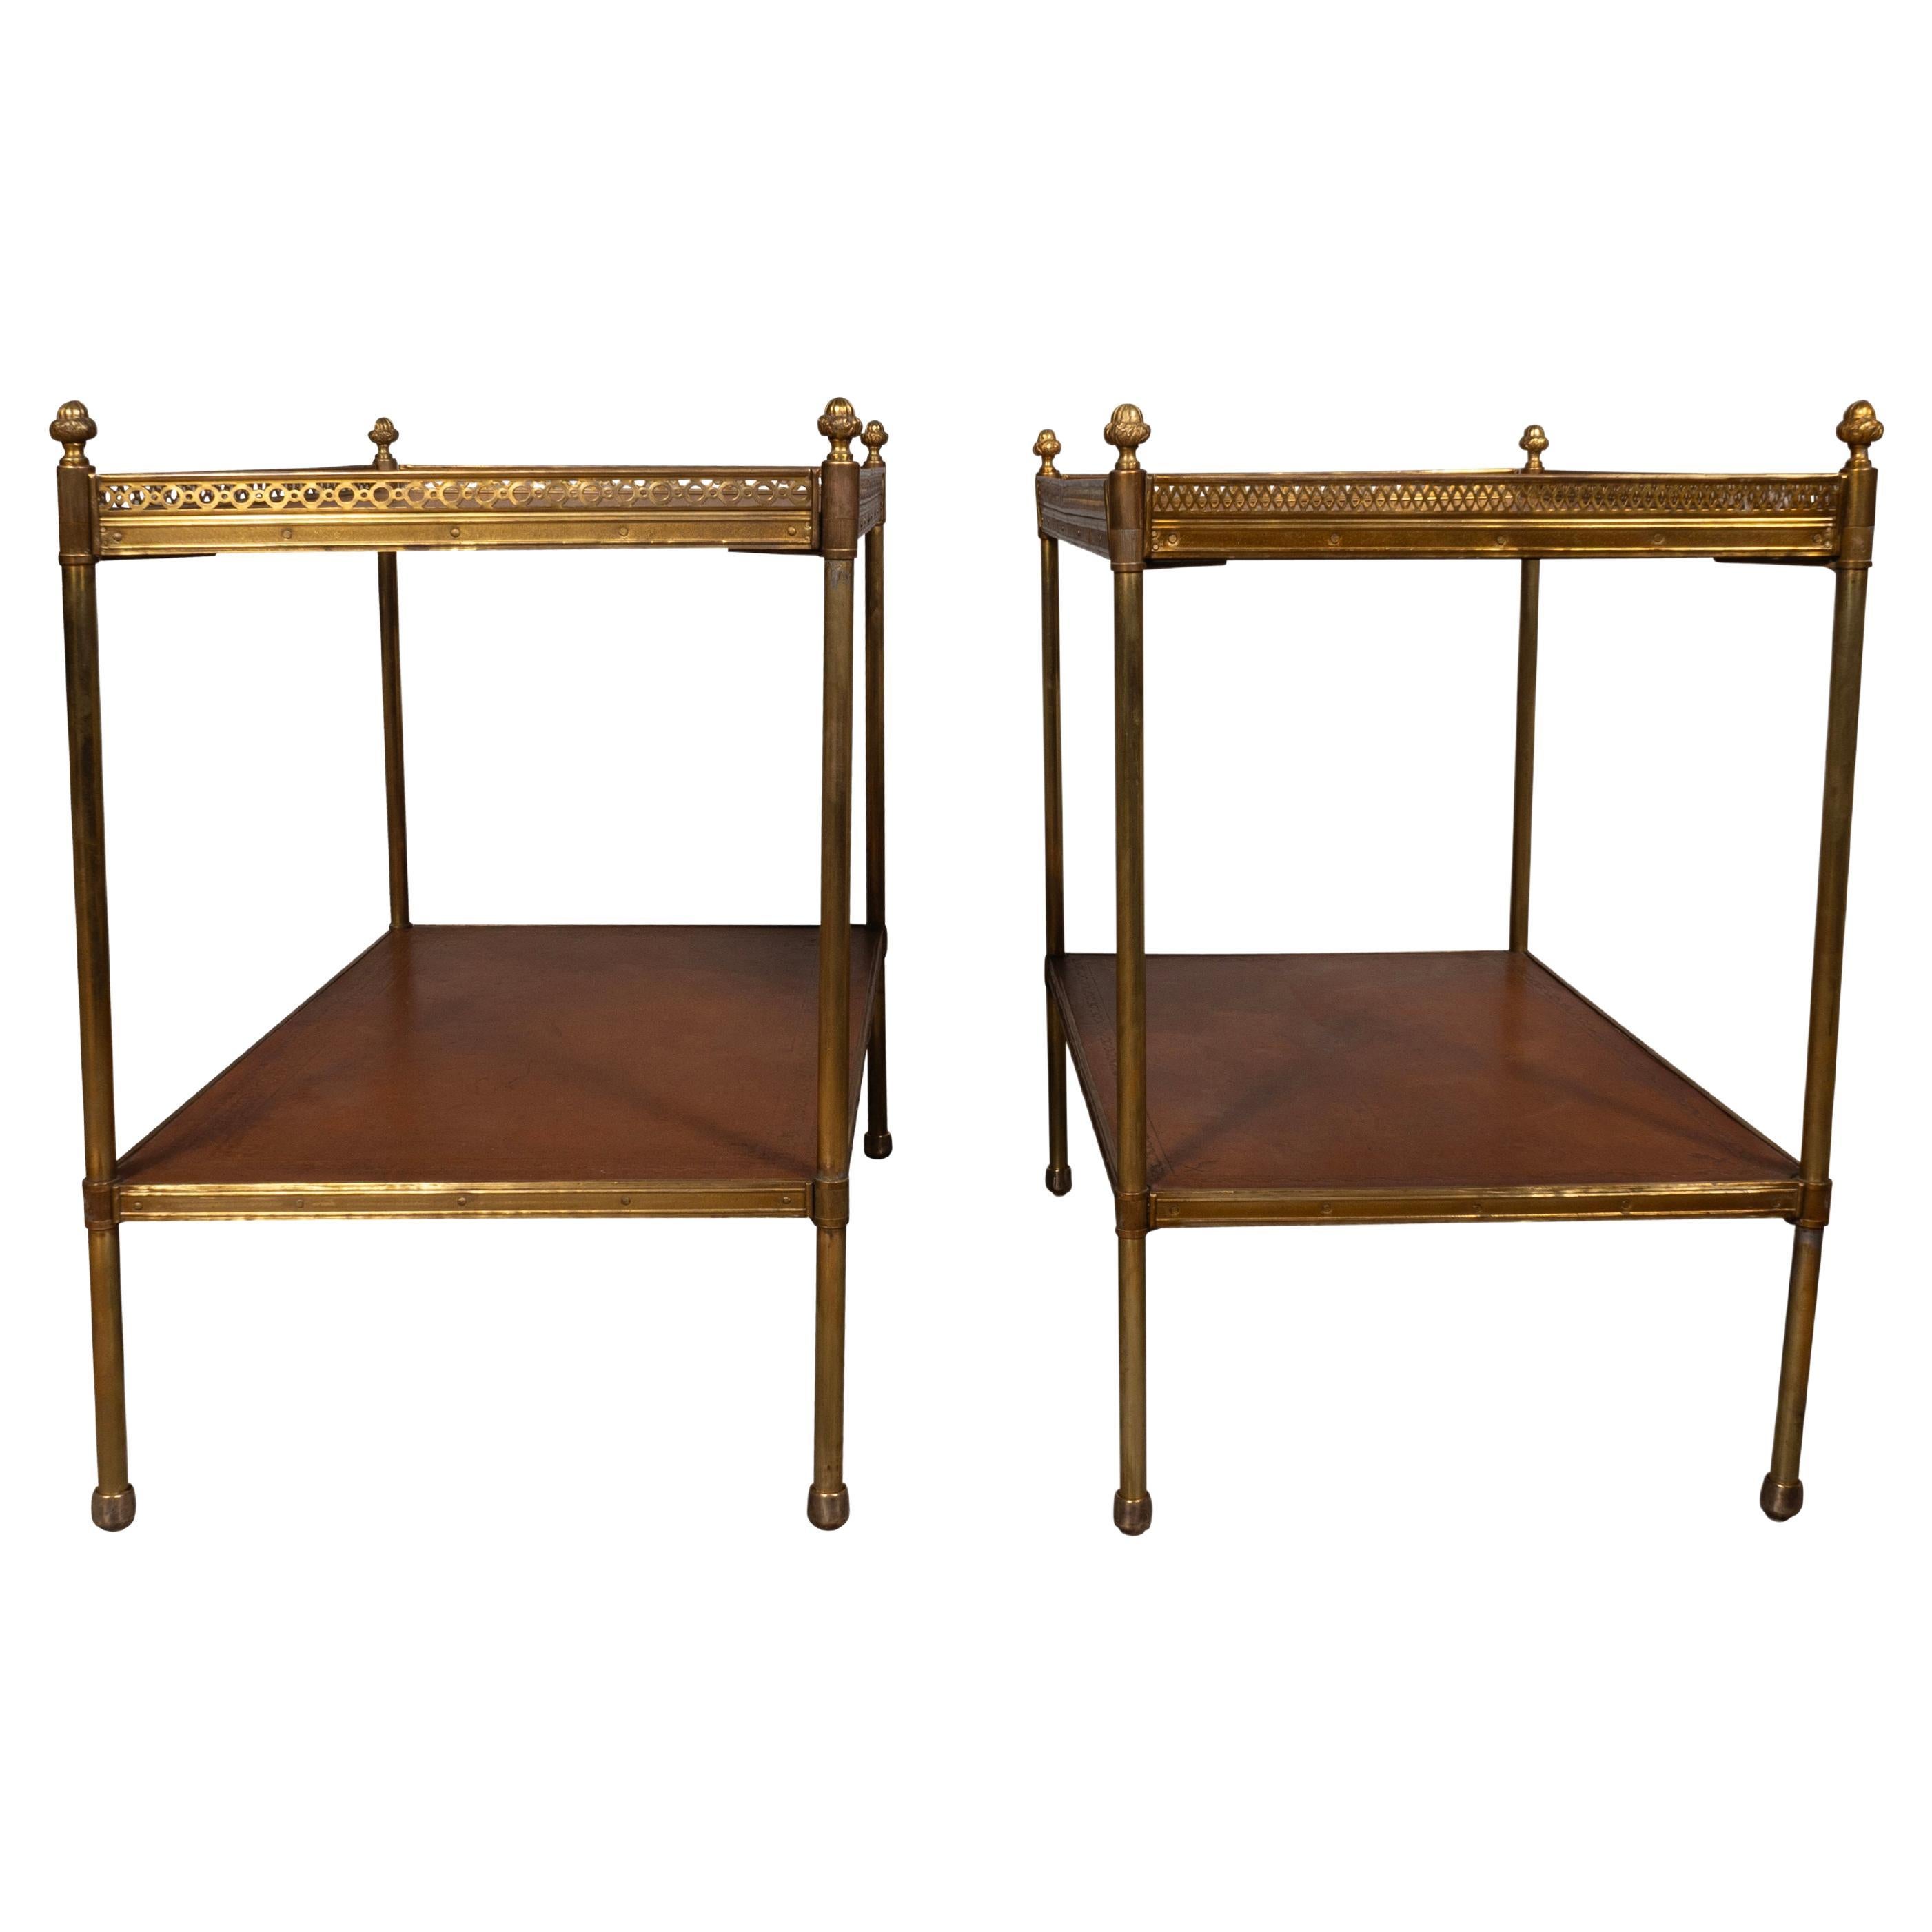 Two tier with brown leather shelves and brass gallery and legs.